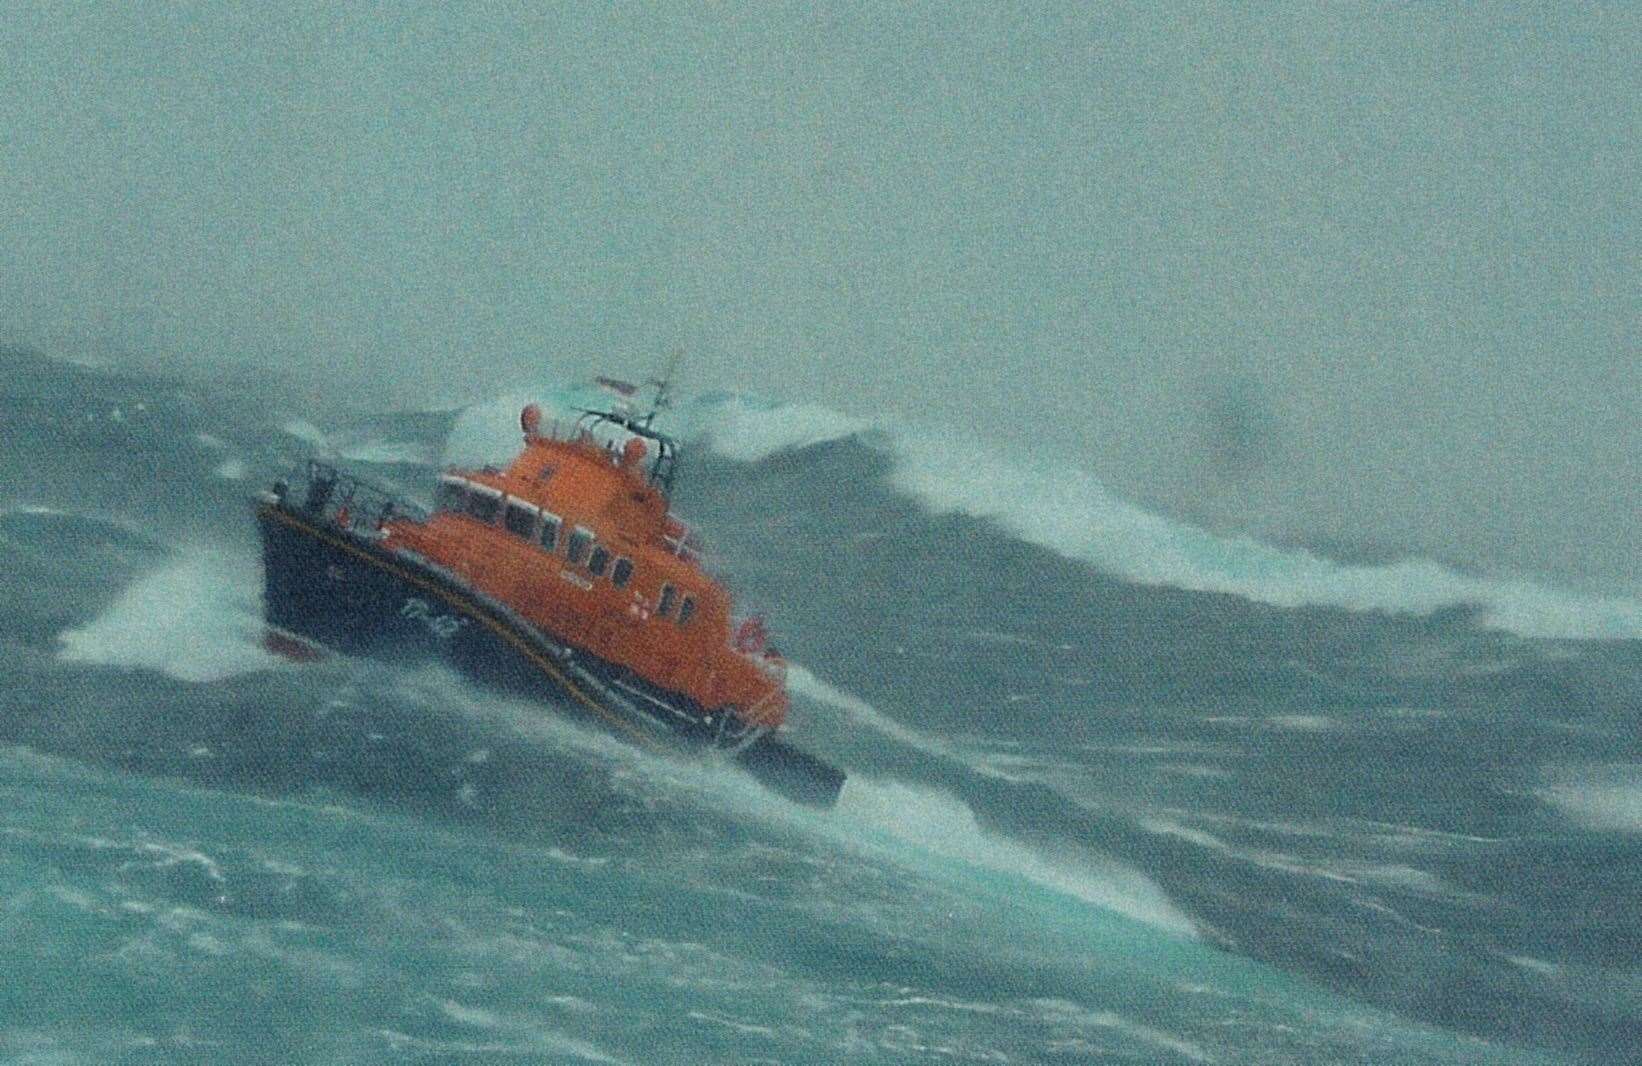 In rough weather on 27 August 2004, the Norwegian fish carrier Arnoytrans lost steering when her rudder jammed. The vessel was only about 2 miles from Stroma when the Thurso lifeboat, The Taylors, under deputy coxswain Dougie Munro took her in tow. This photo of the lifeboat, taken by the Norwegian skipper Henrick Steffenson, shows the high seas in the Firth.